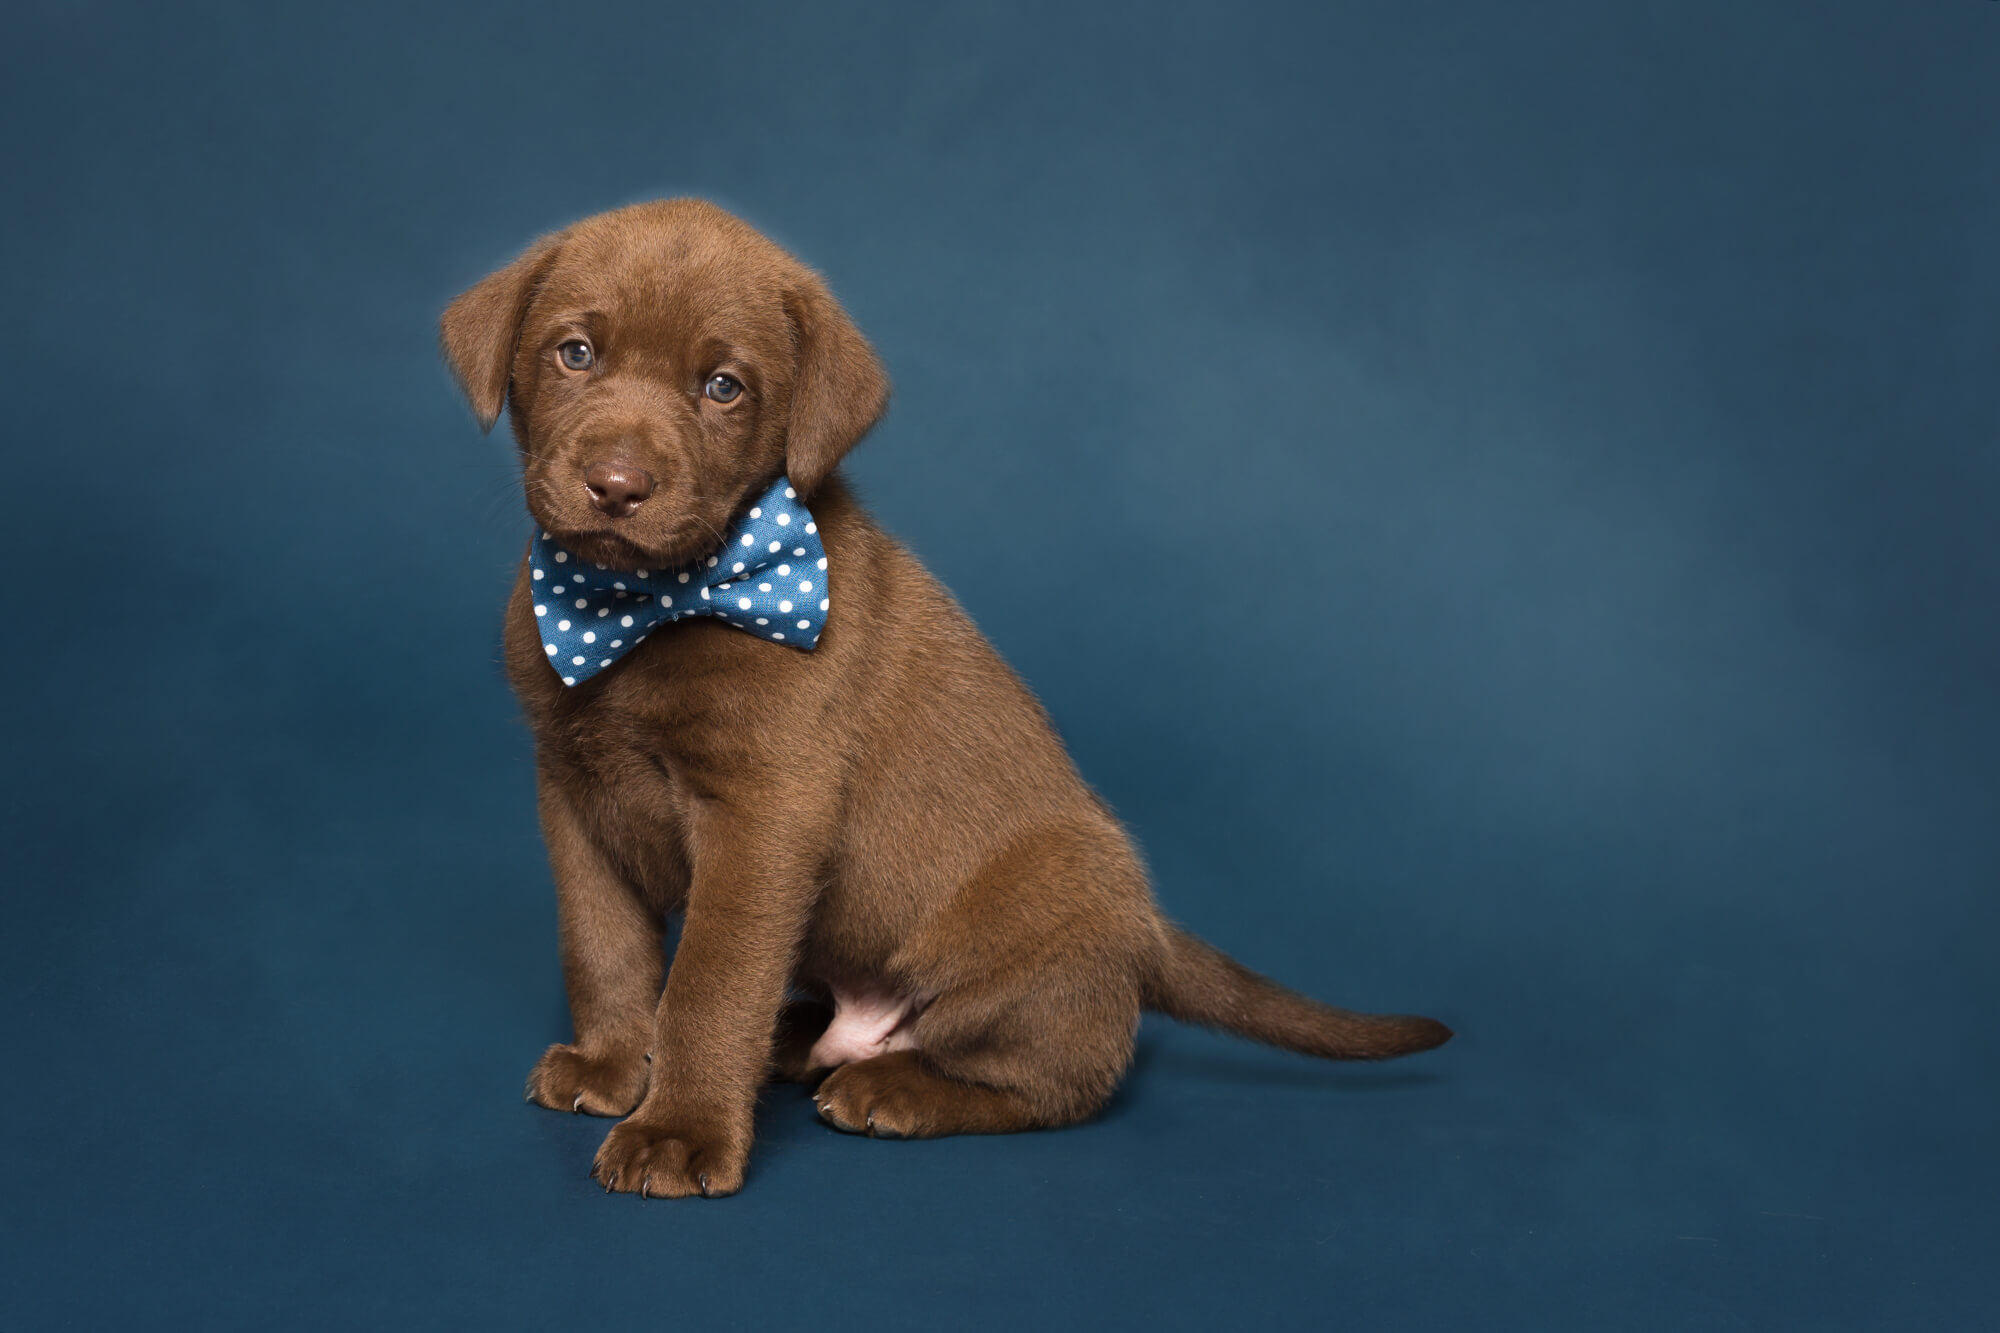 chocolate lab puppy with blue bowtie photographed in Toronto